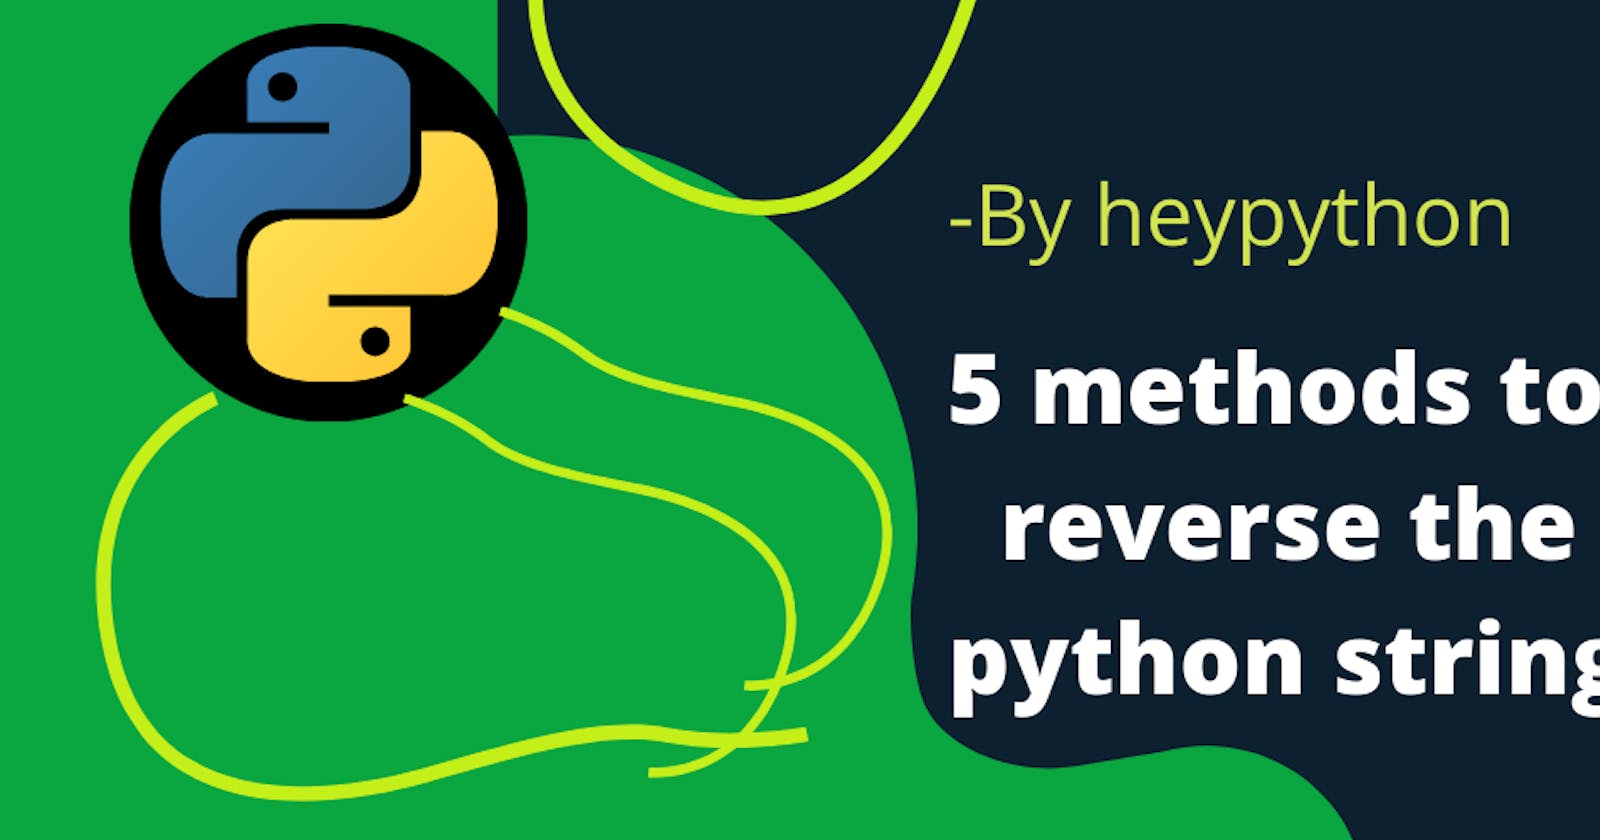 5 proven methods to reverse the python string in 2022